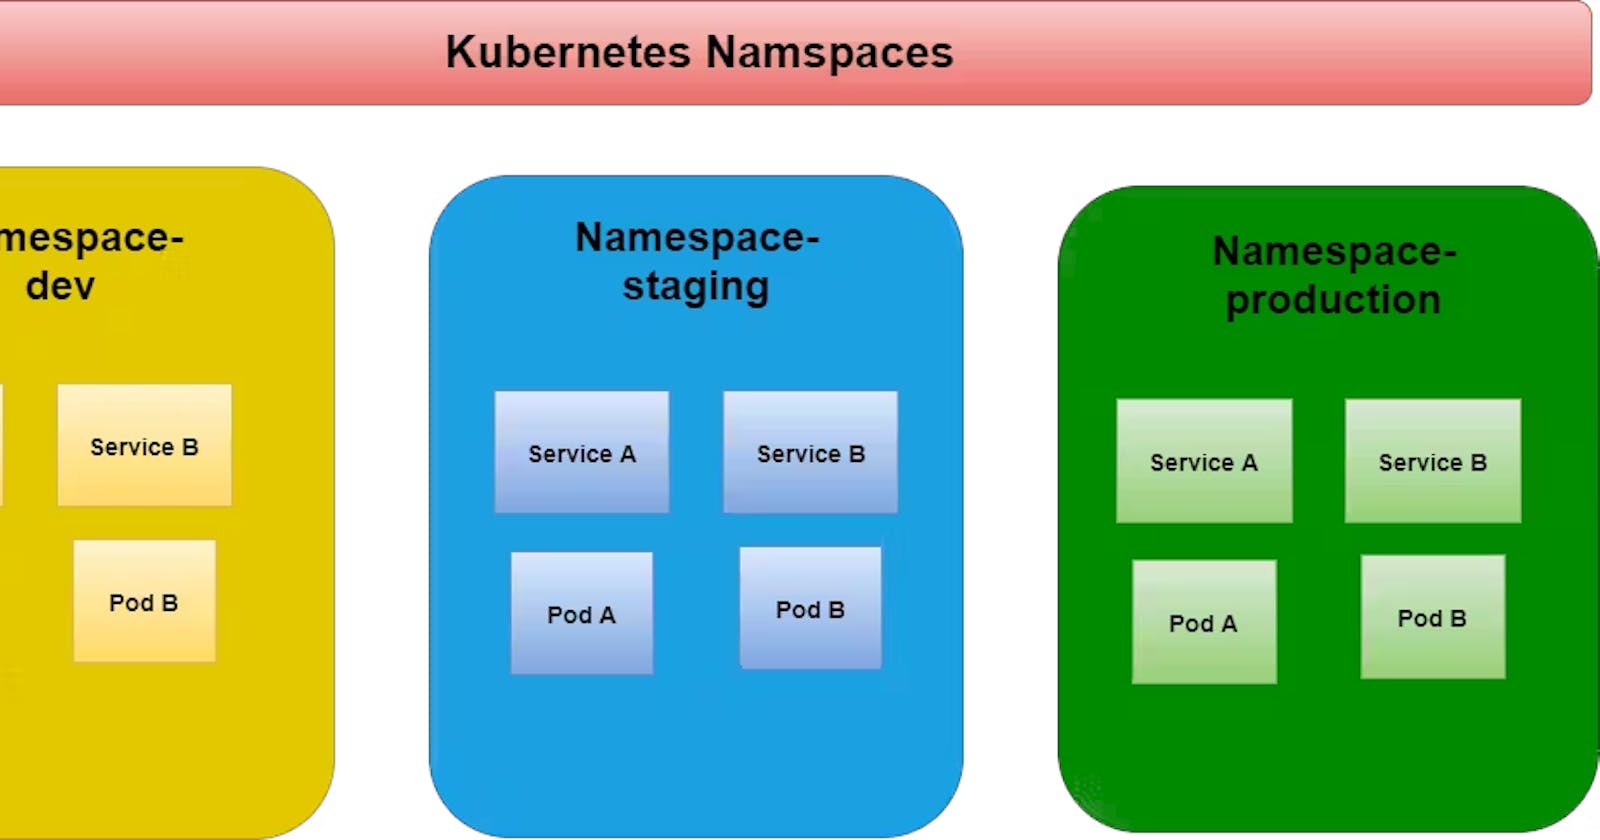 Namespaces and Services in Kubernetes.